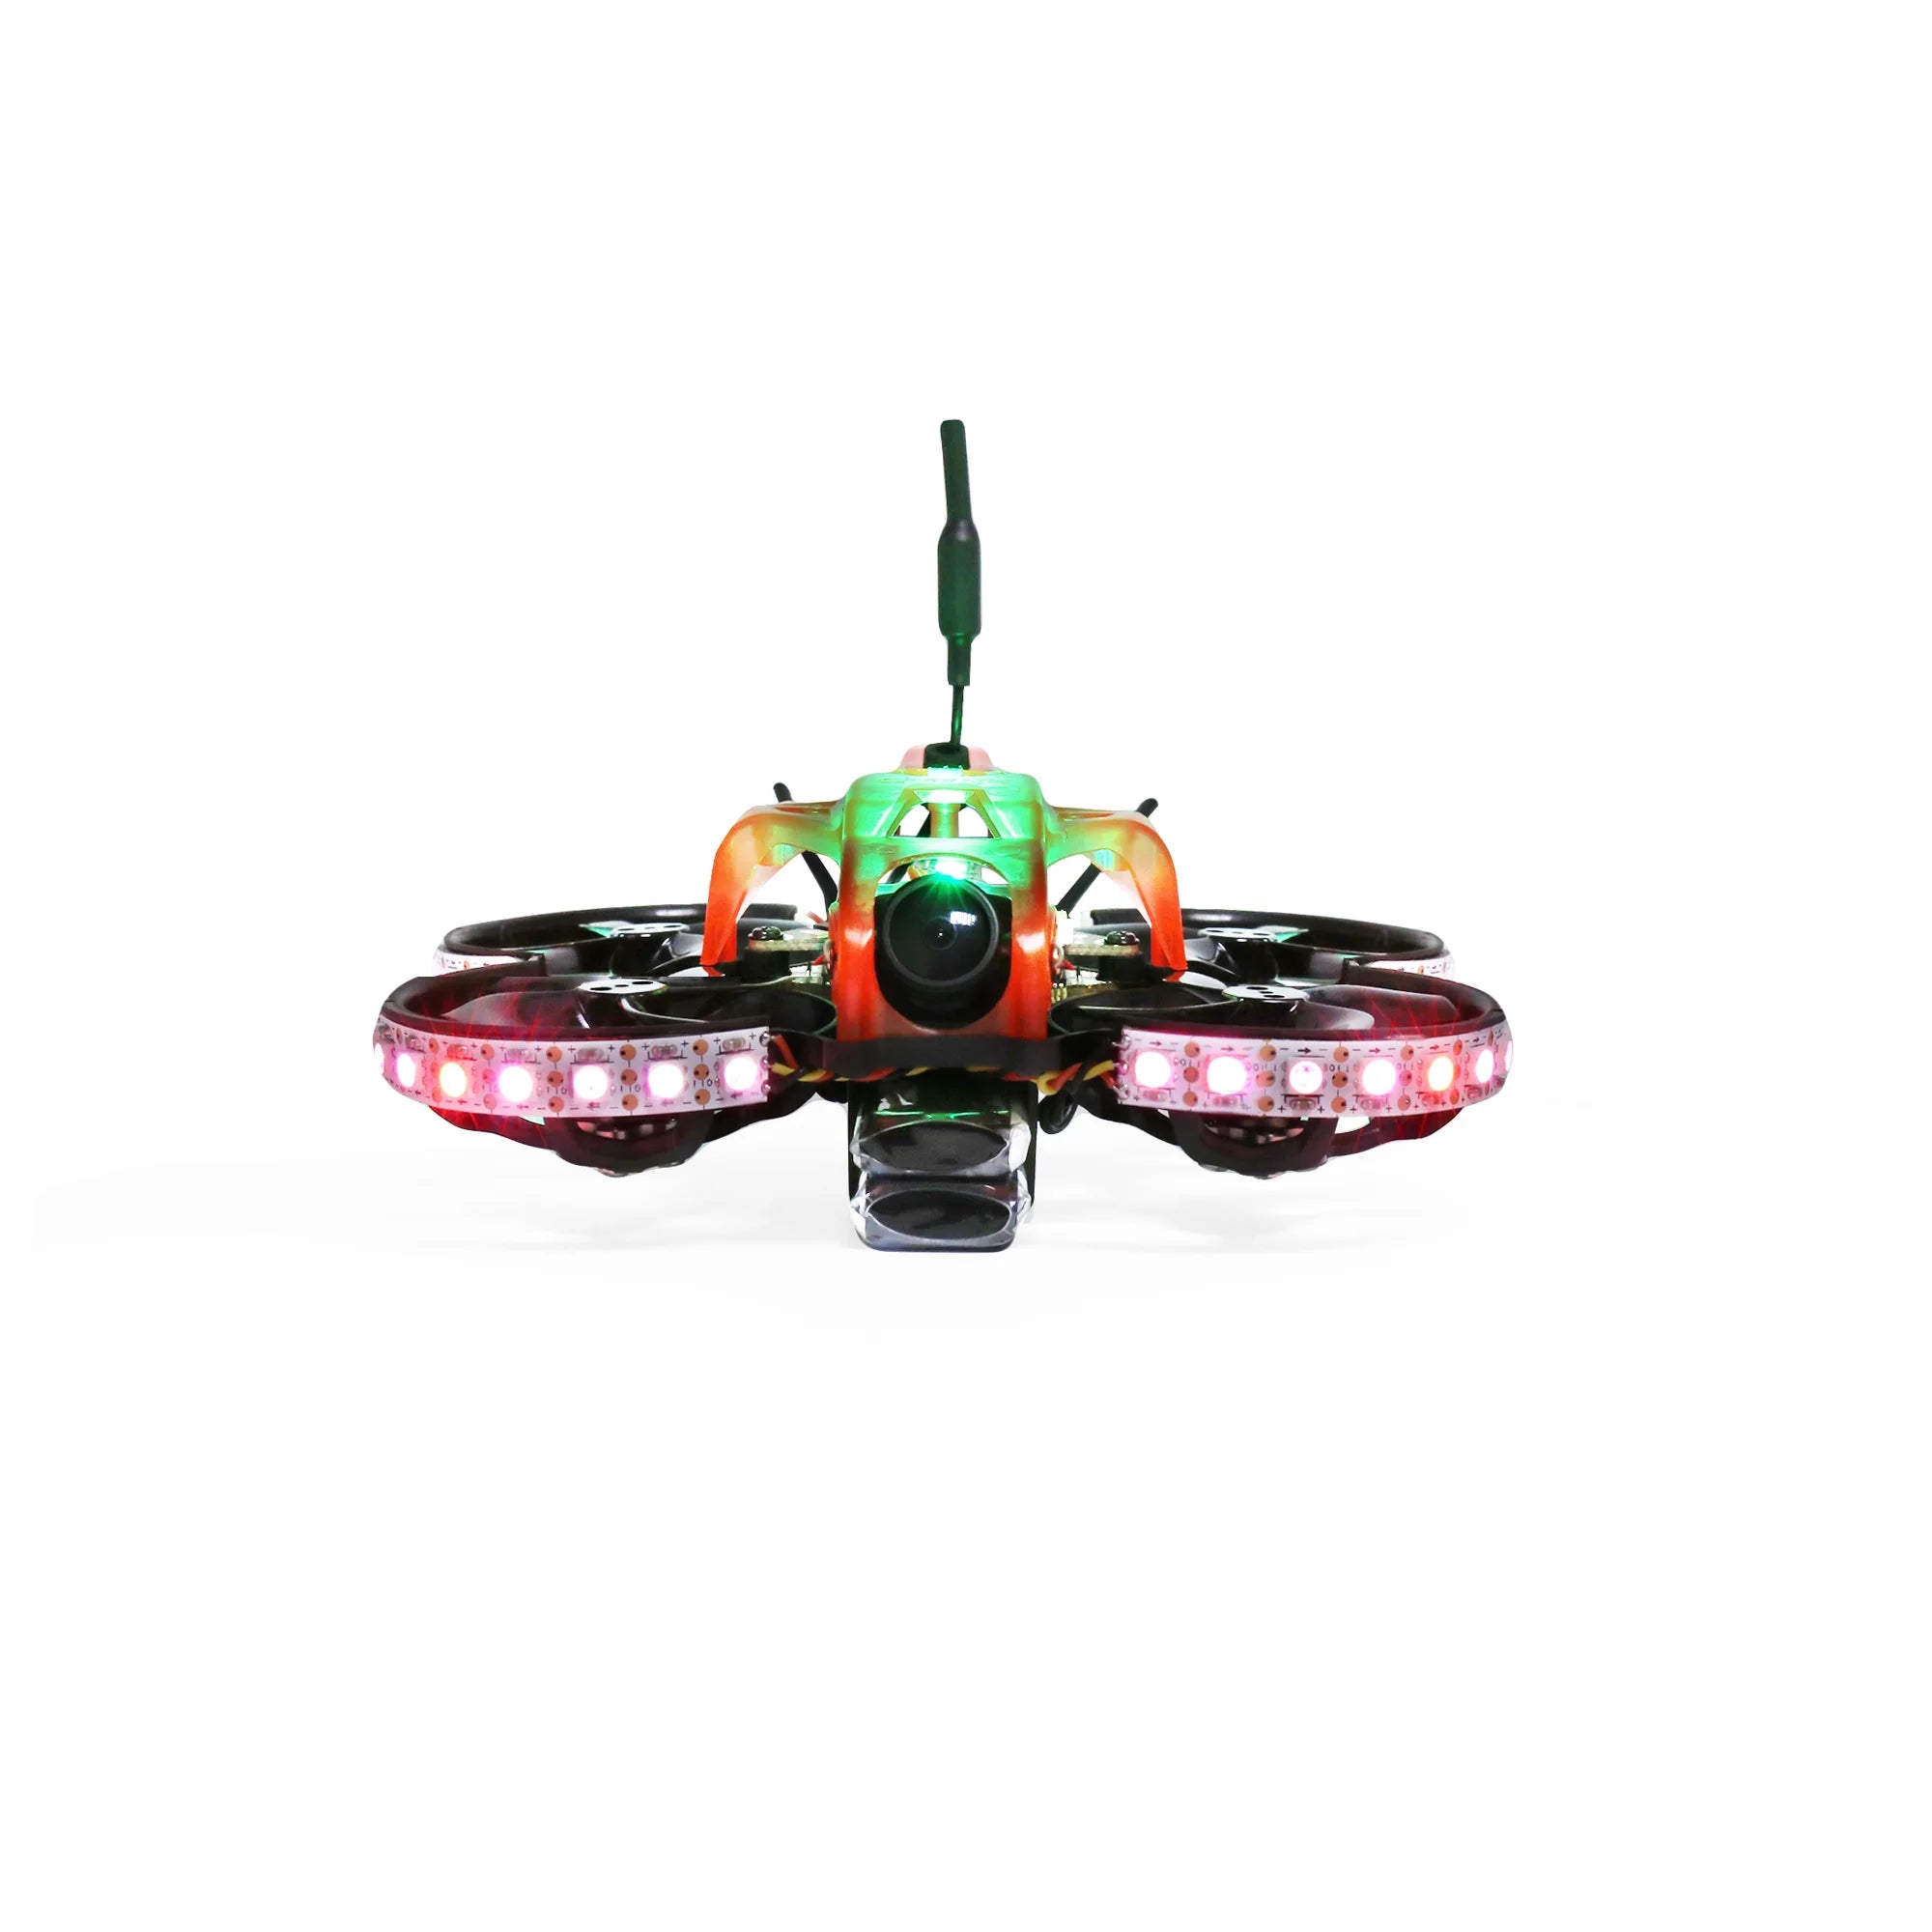 GEPRC TinyGO LED  Whoop RTF FPV Drone, TinyGO LED can be flight more than 4 minutes (Depending on flight habits)